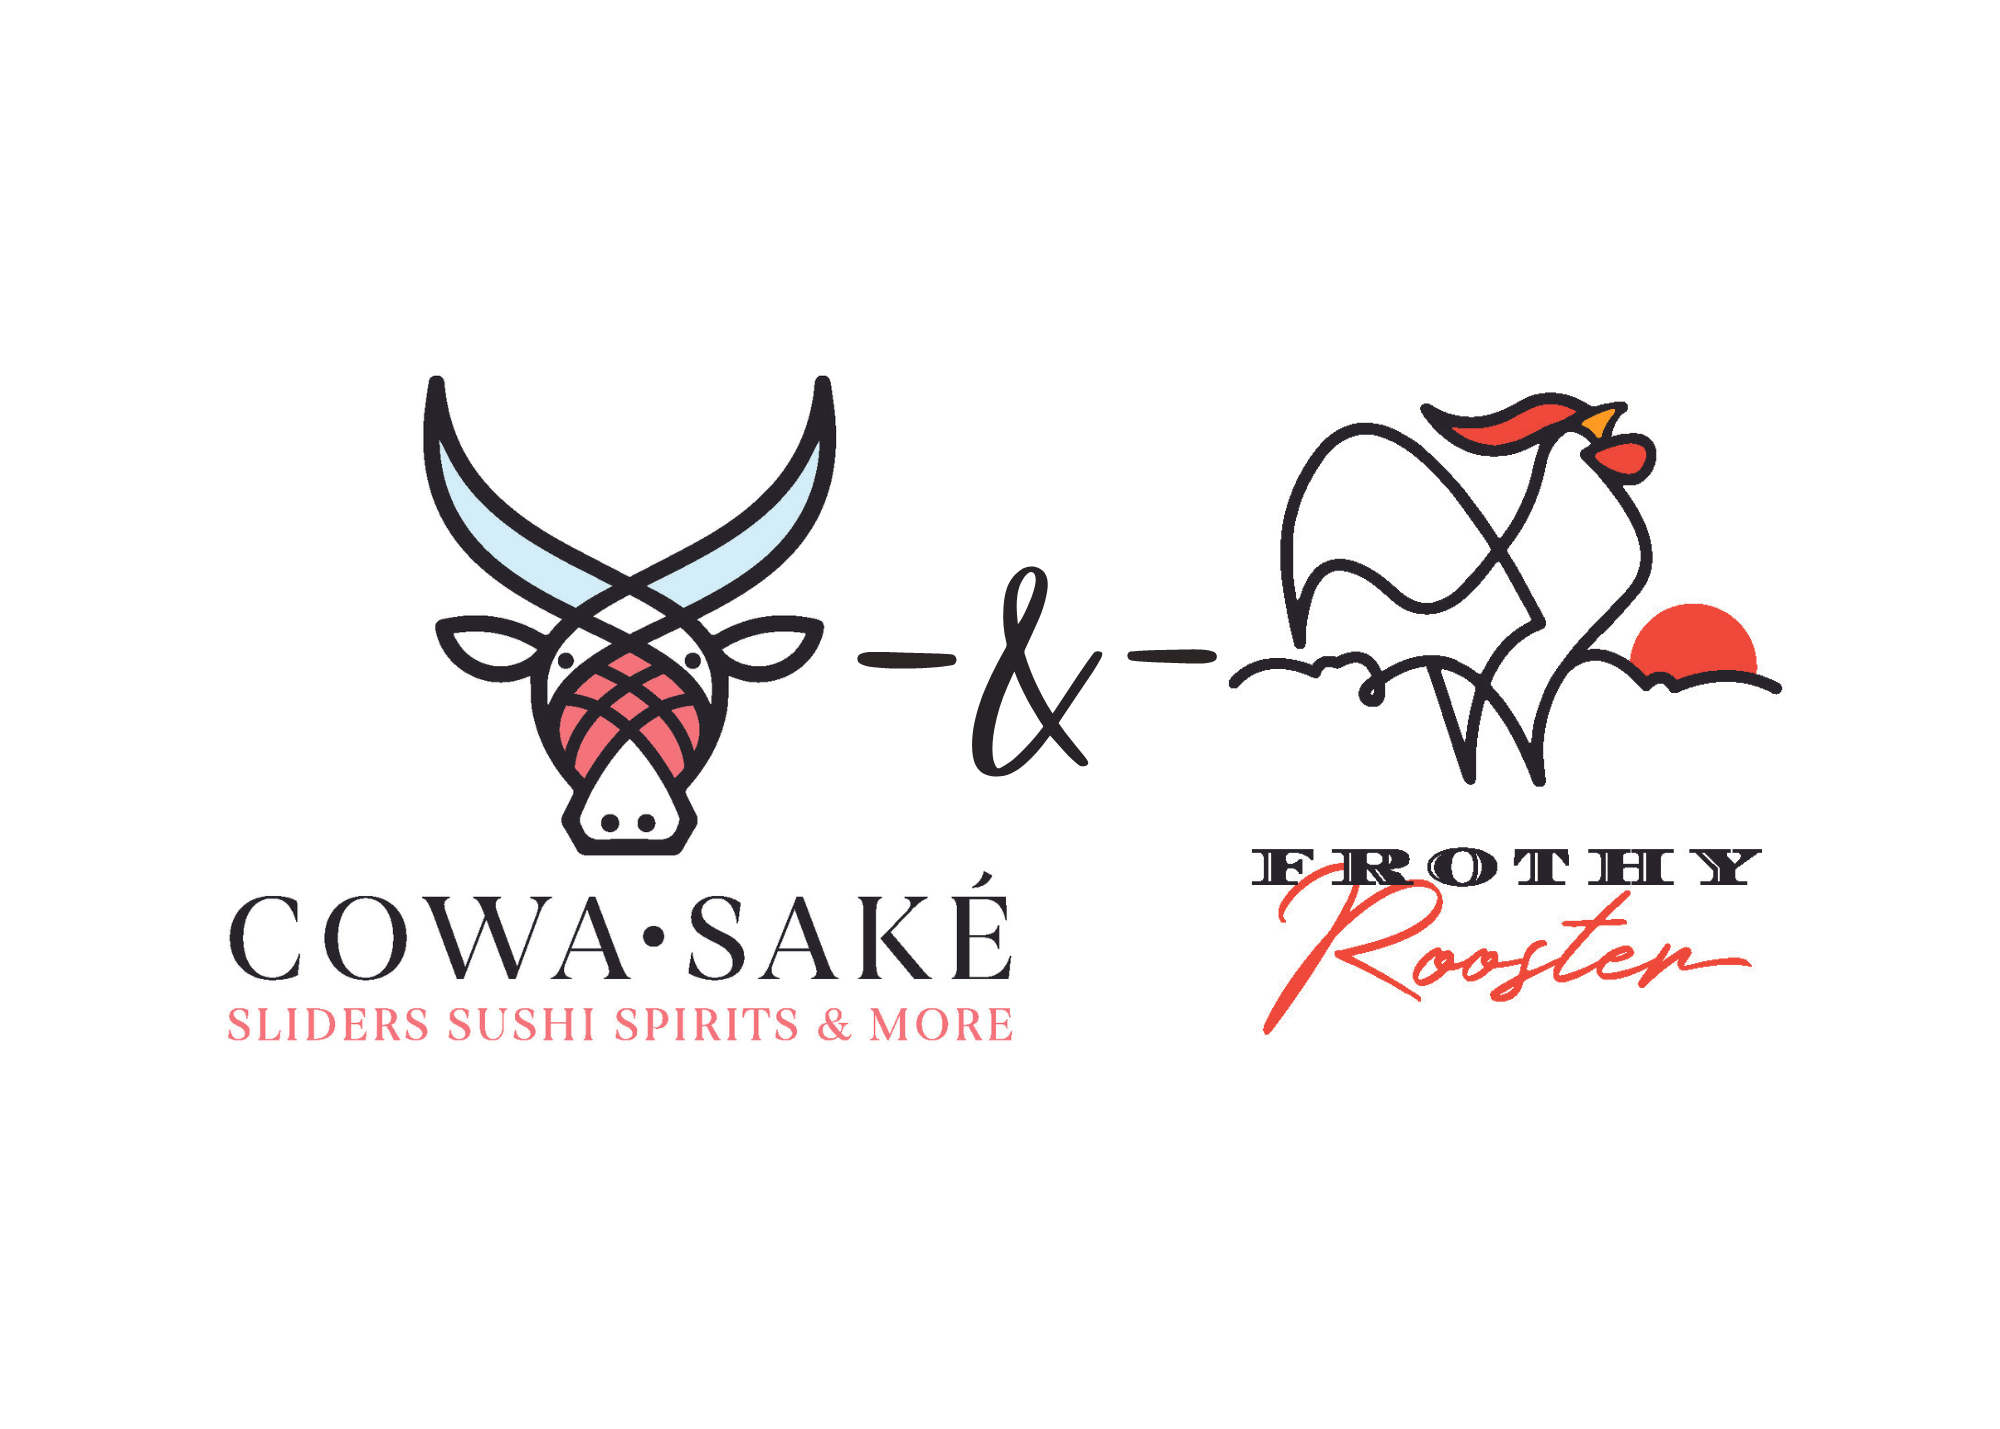 Cowa-Sake & Frothy Rooster